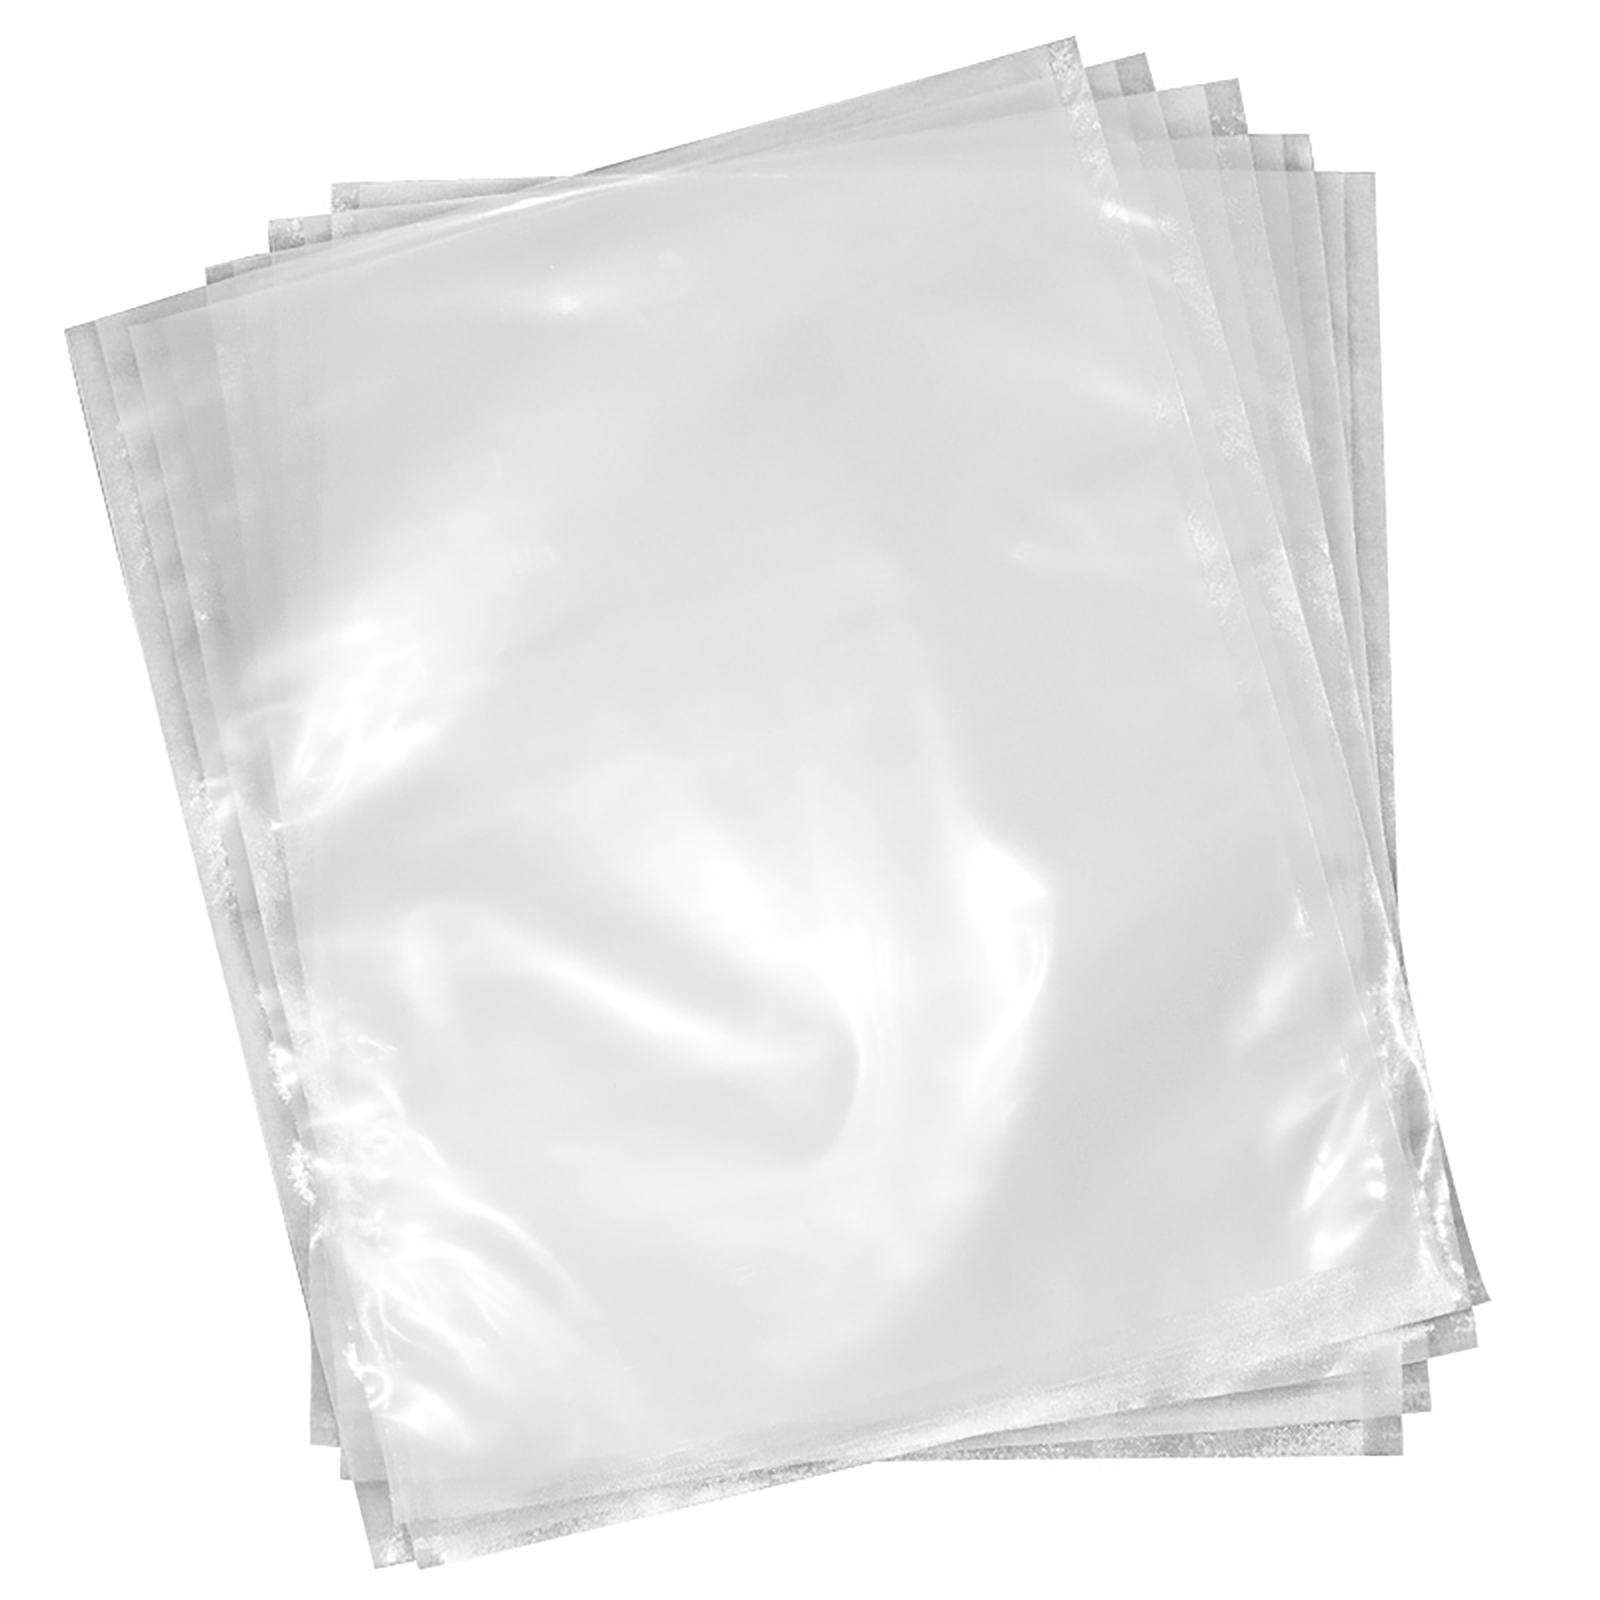 Embossed Vacuum Sealer Bags – 100 Units - 08x12 by Hal Packaging Consumables